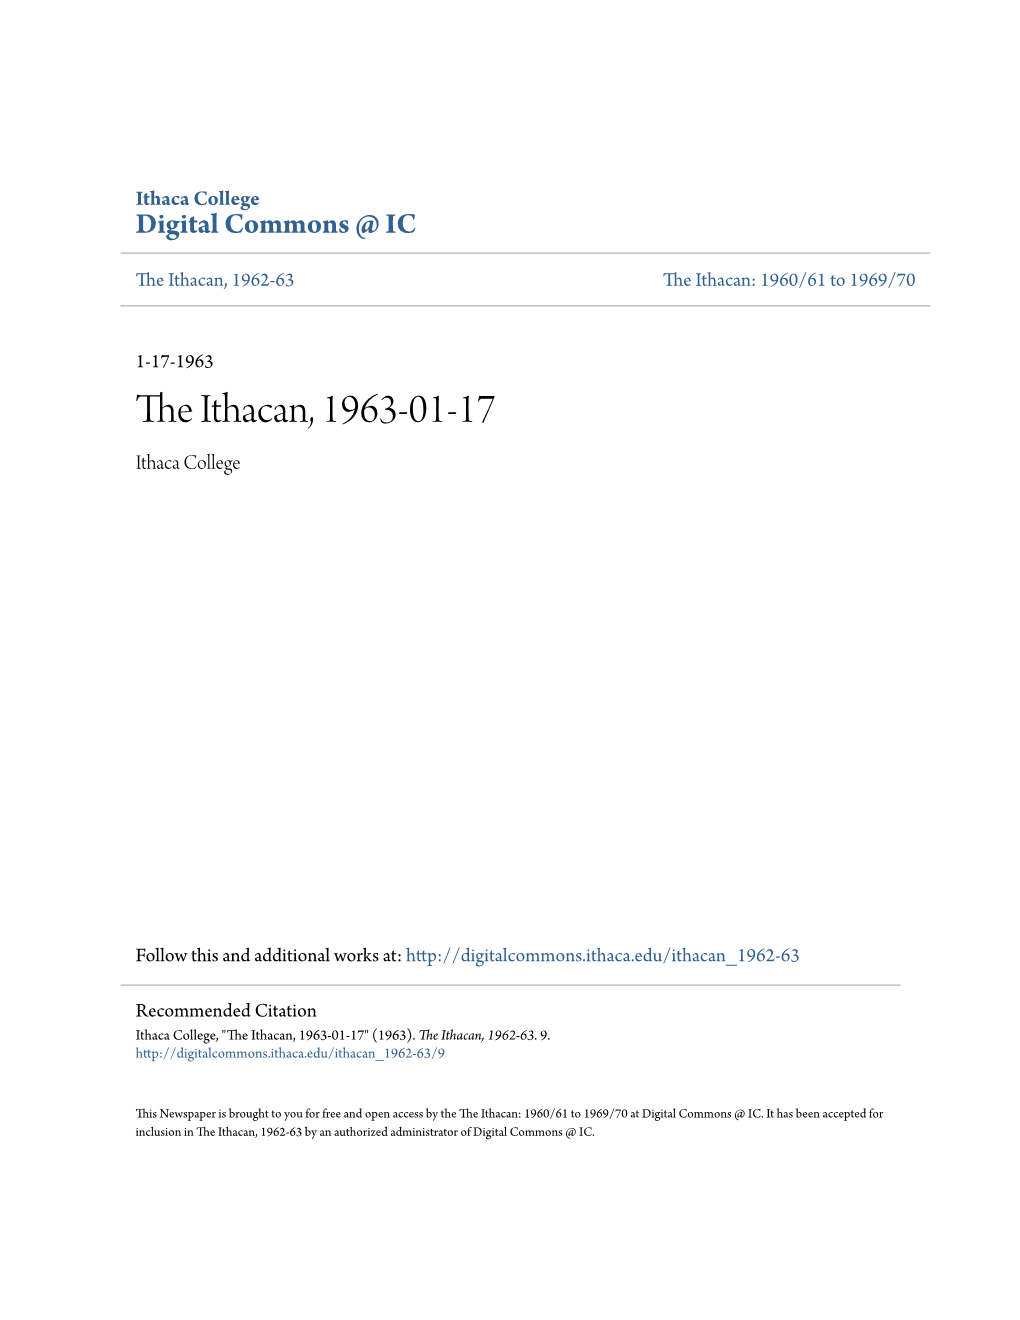 The Ithacan, 1963-01-17